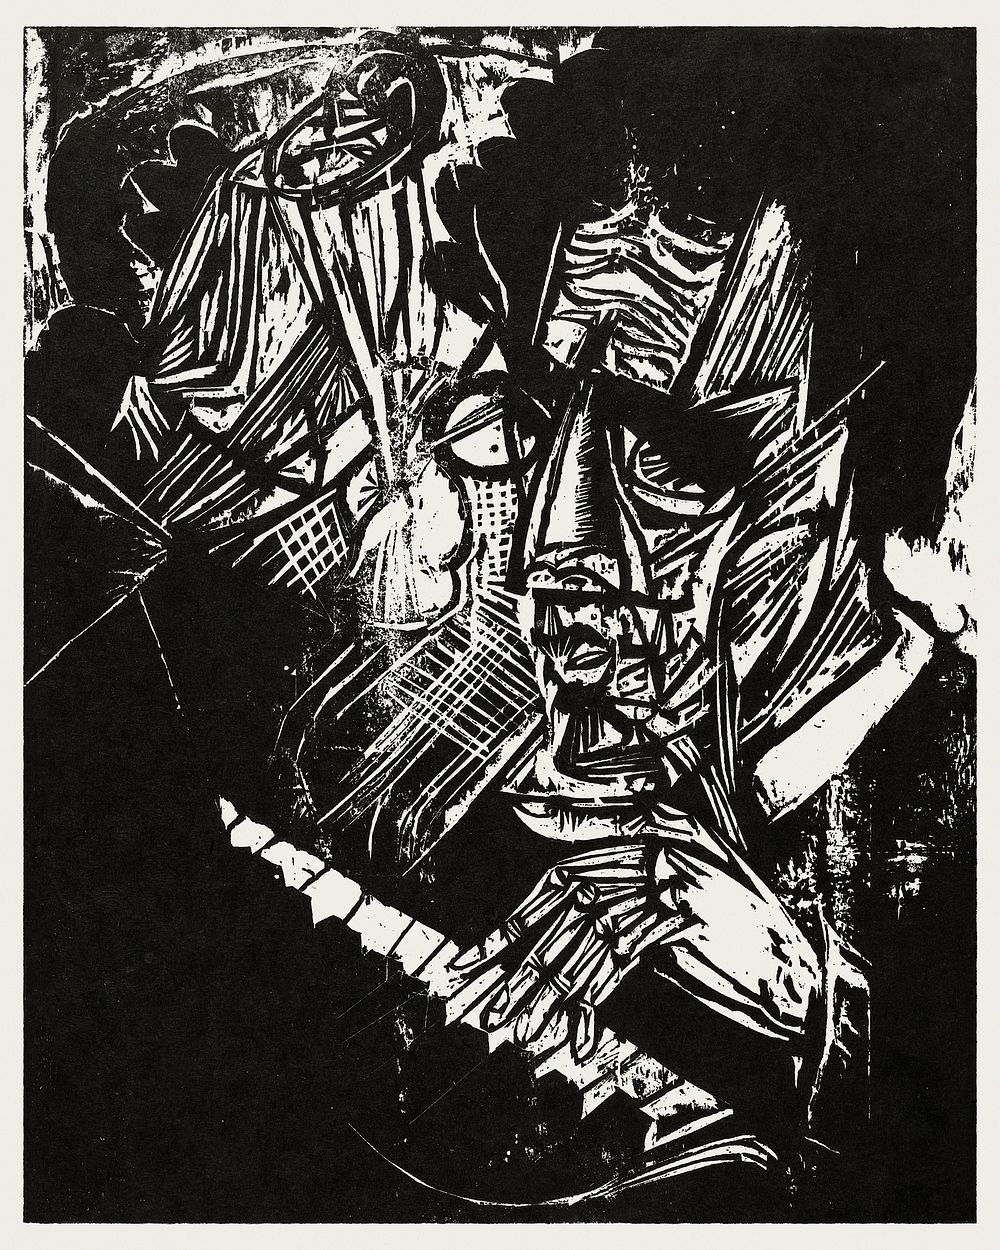 Composer Klemperer (1916) print in high resolution by Ernst Ludwig Kirchner. Original from The National Gallery of Art.…